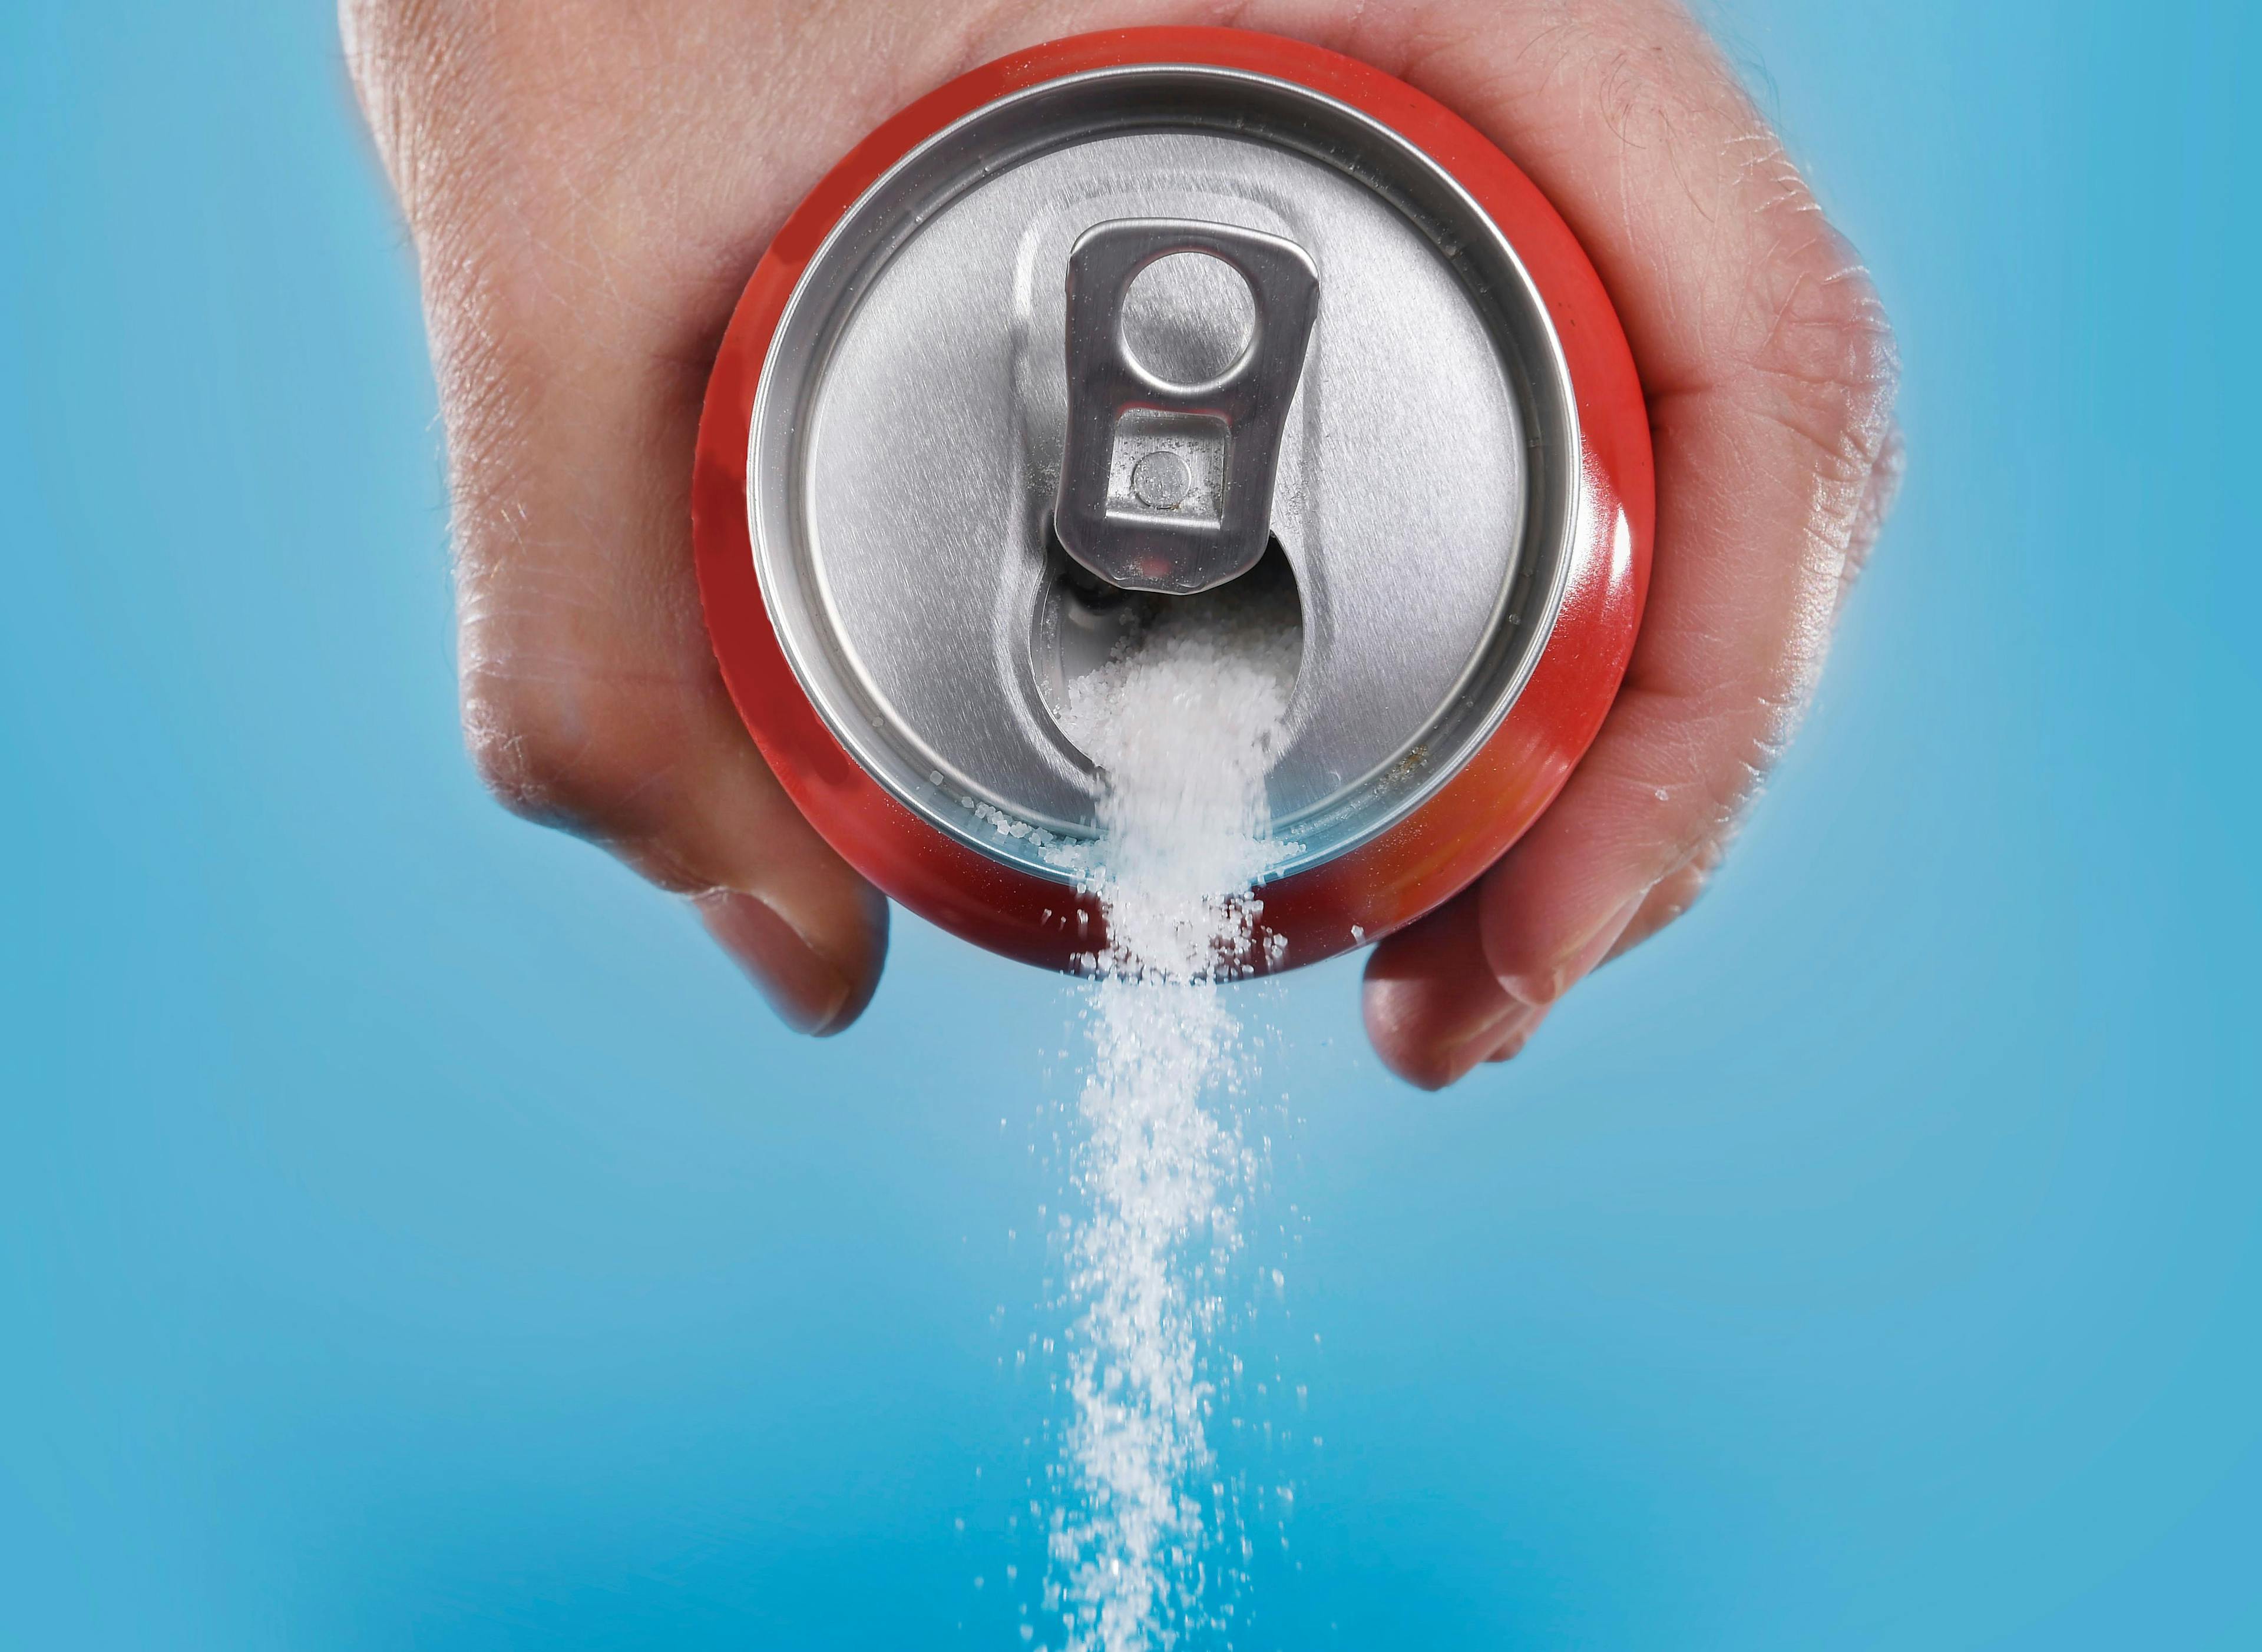 How labels can reduce the purchases of high-added sugar beverages